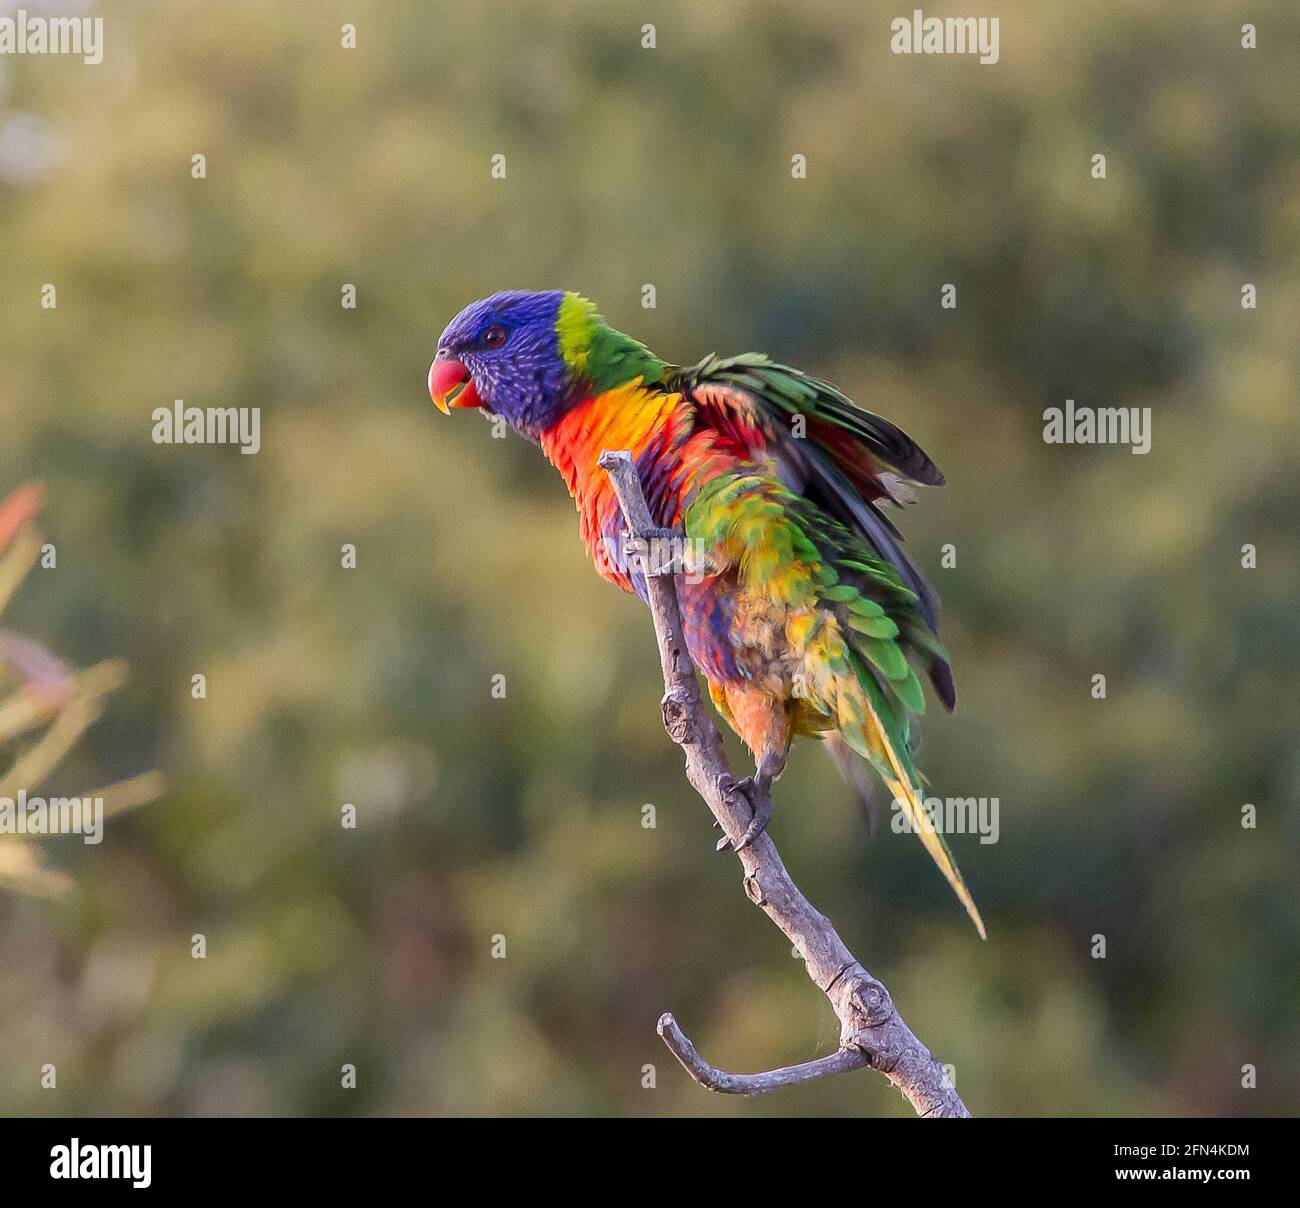 Colourful Rainbow lorikeet, trichoglossus moluccanus, about to take off from a tree branch, Tamborine Mountain, Australia. Stock Photo